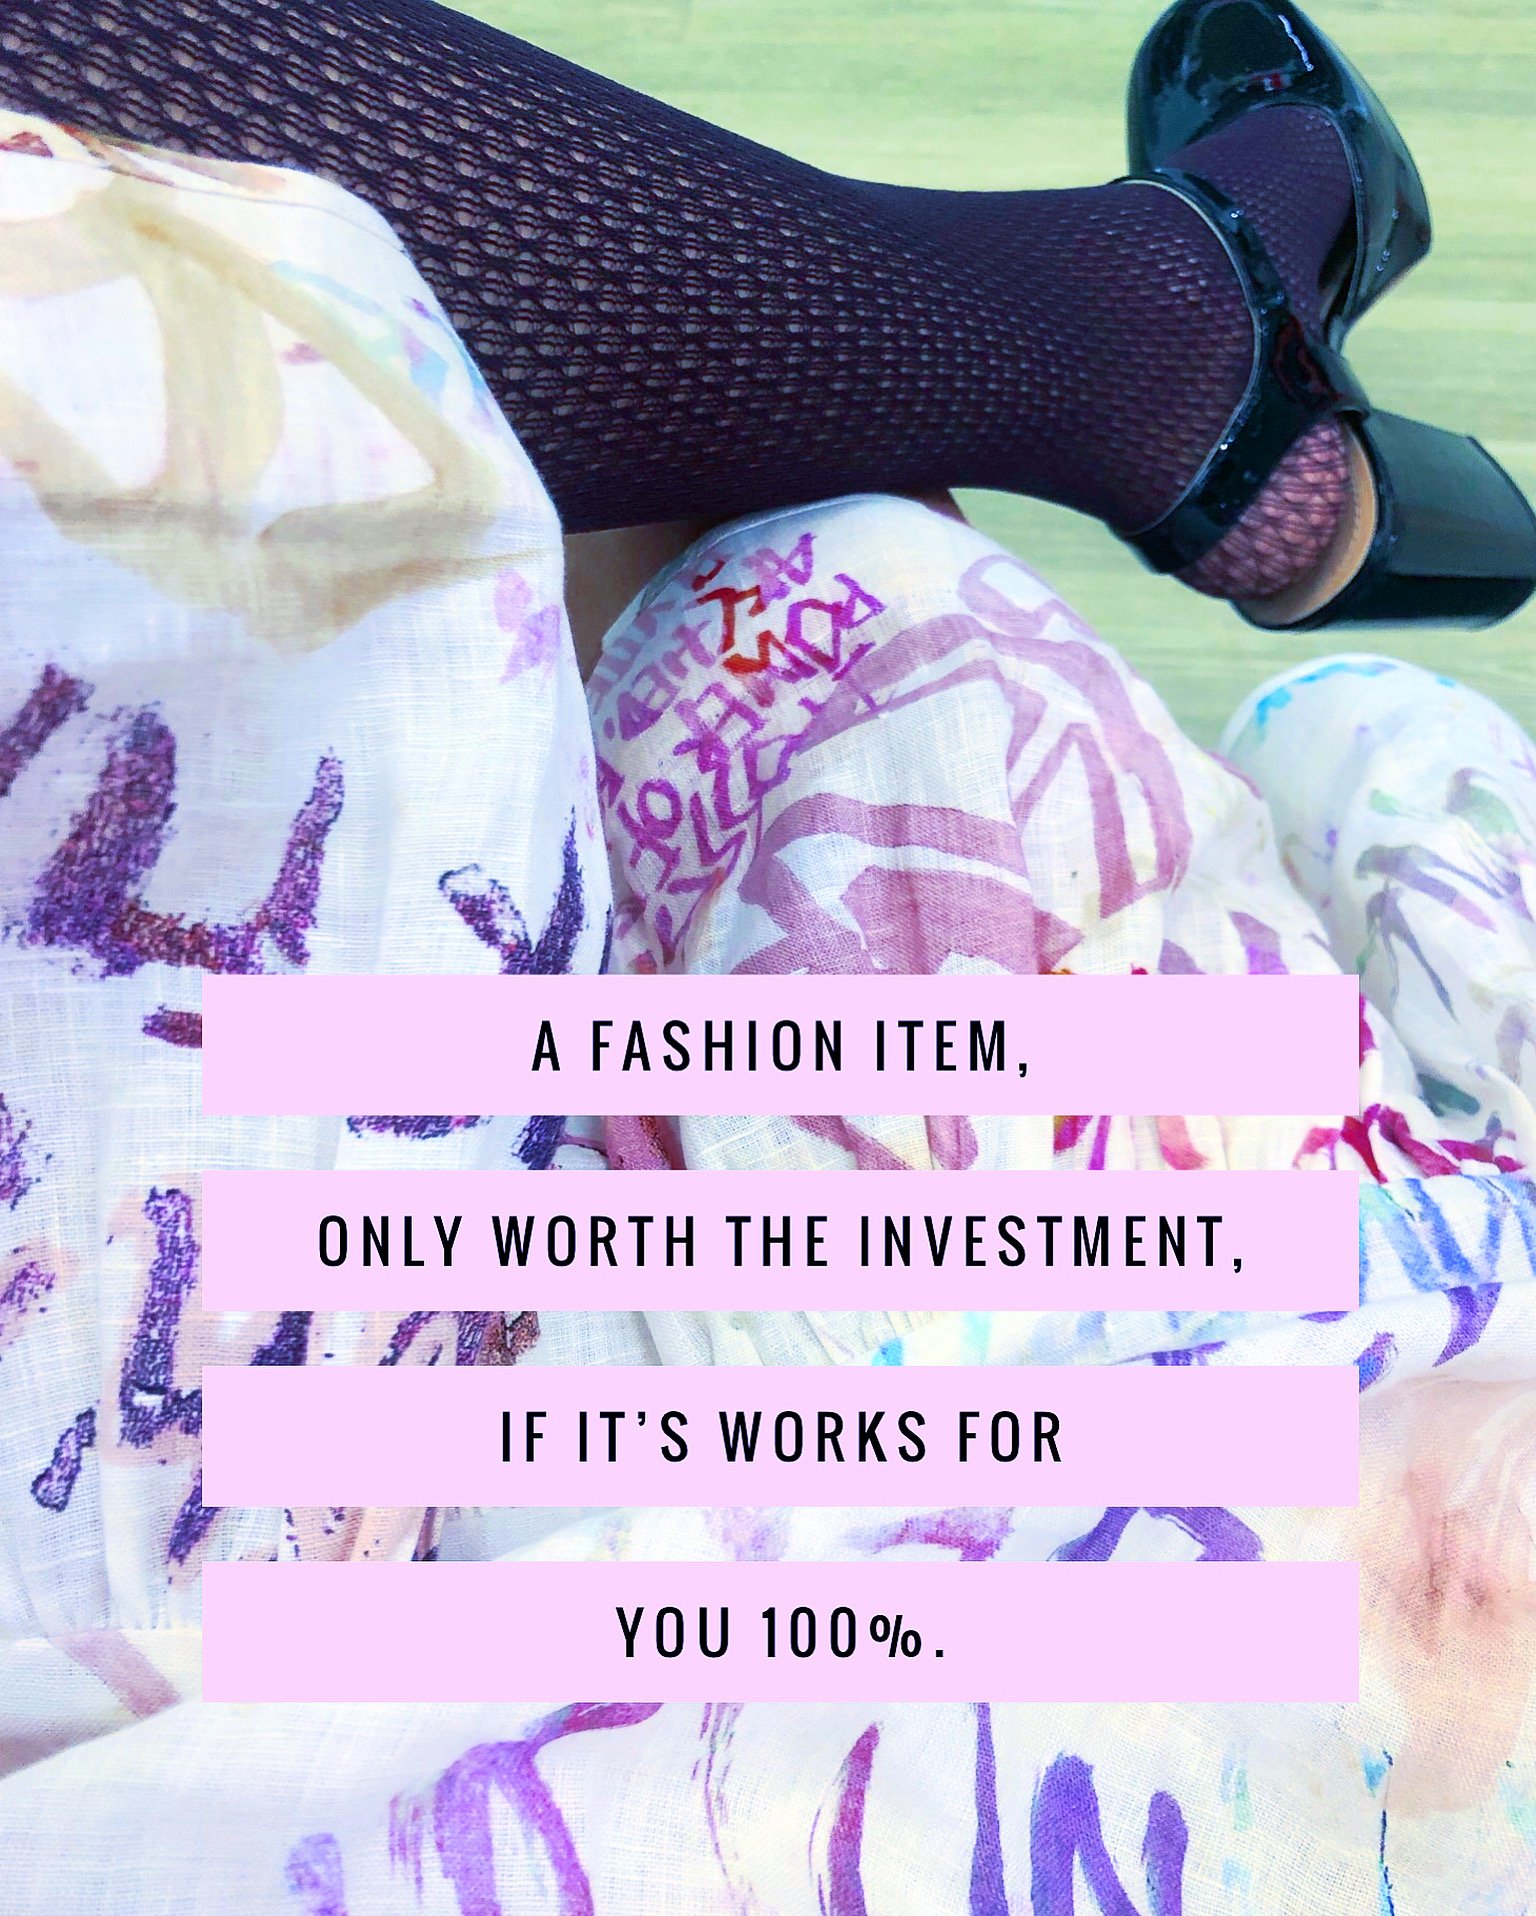 A fashion item, only worth the investment, if it’s works for you 100%